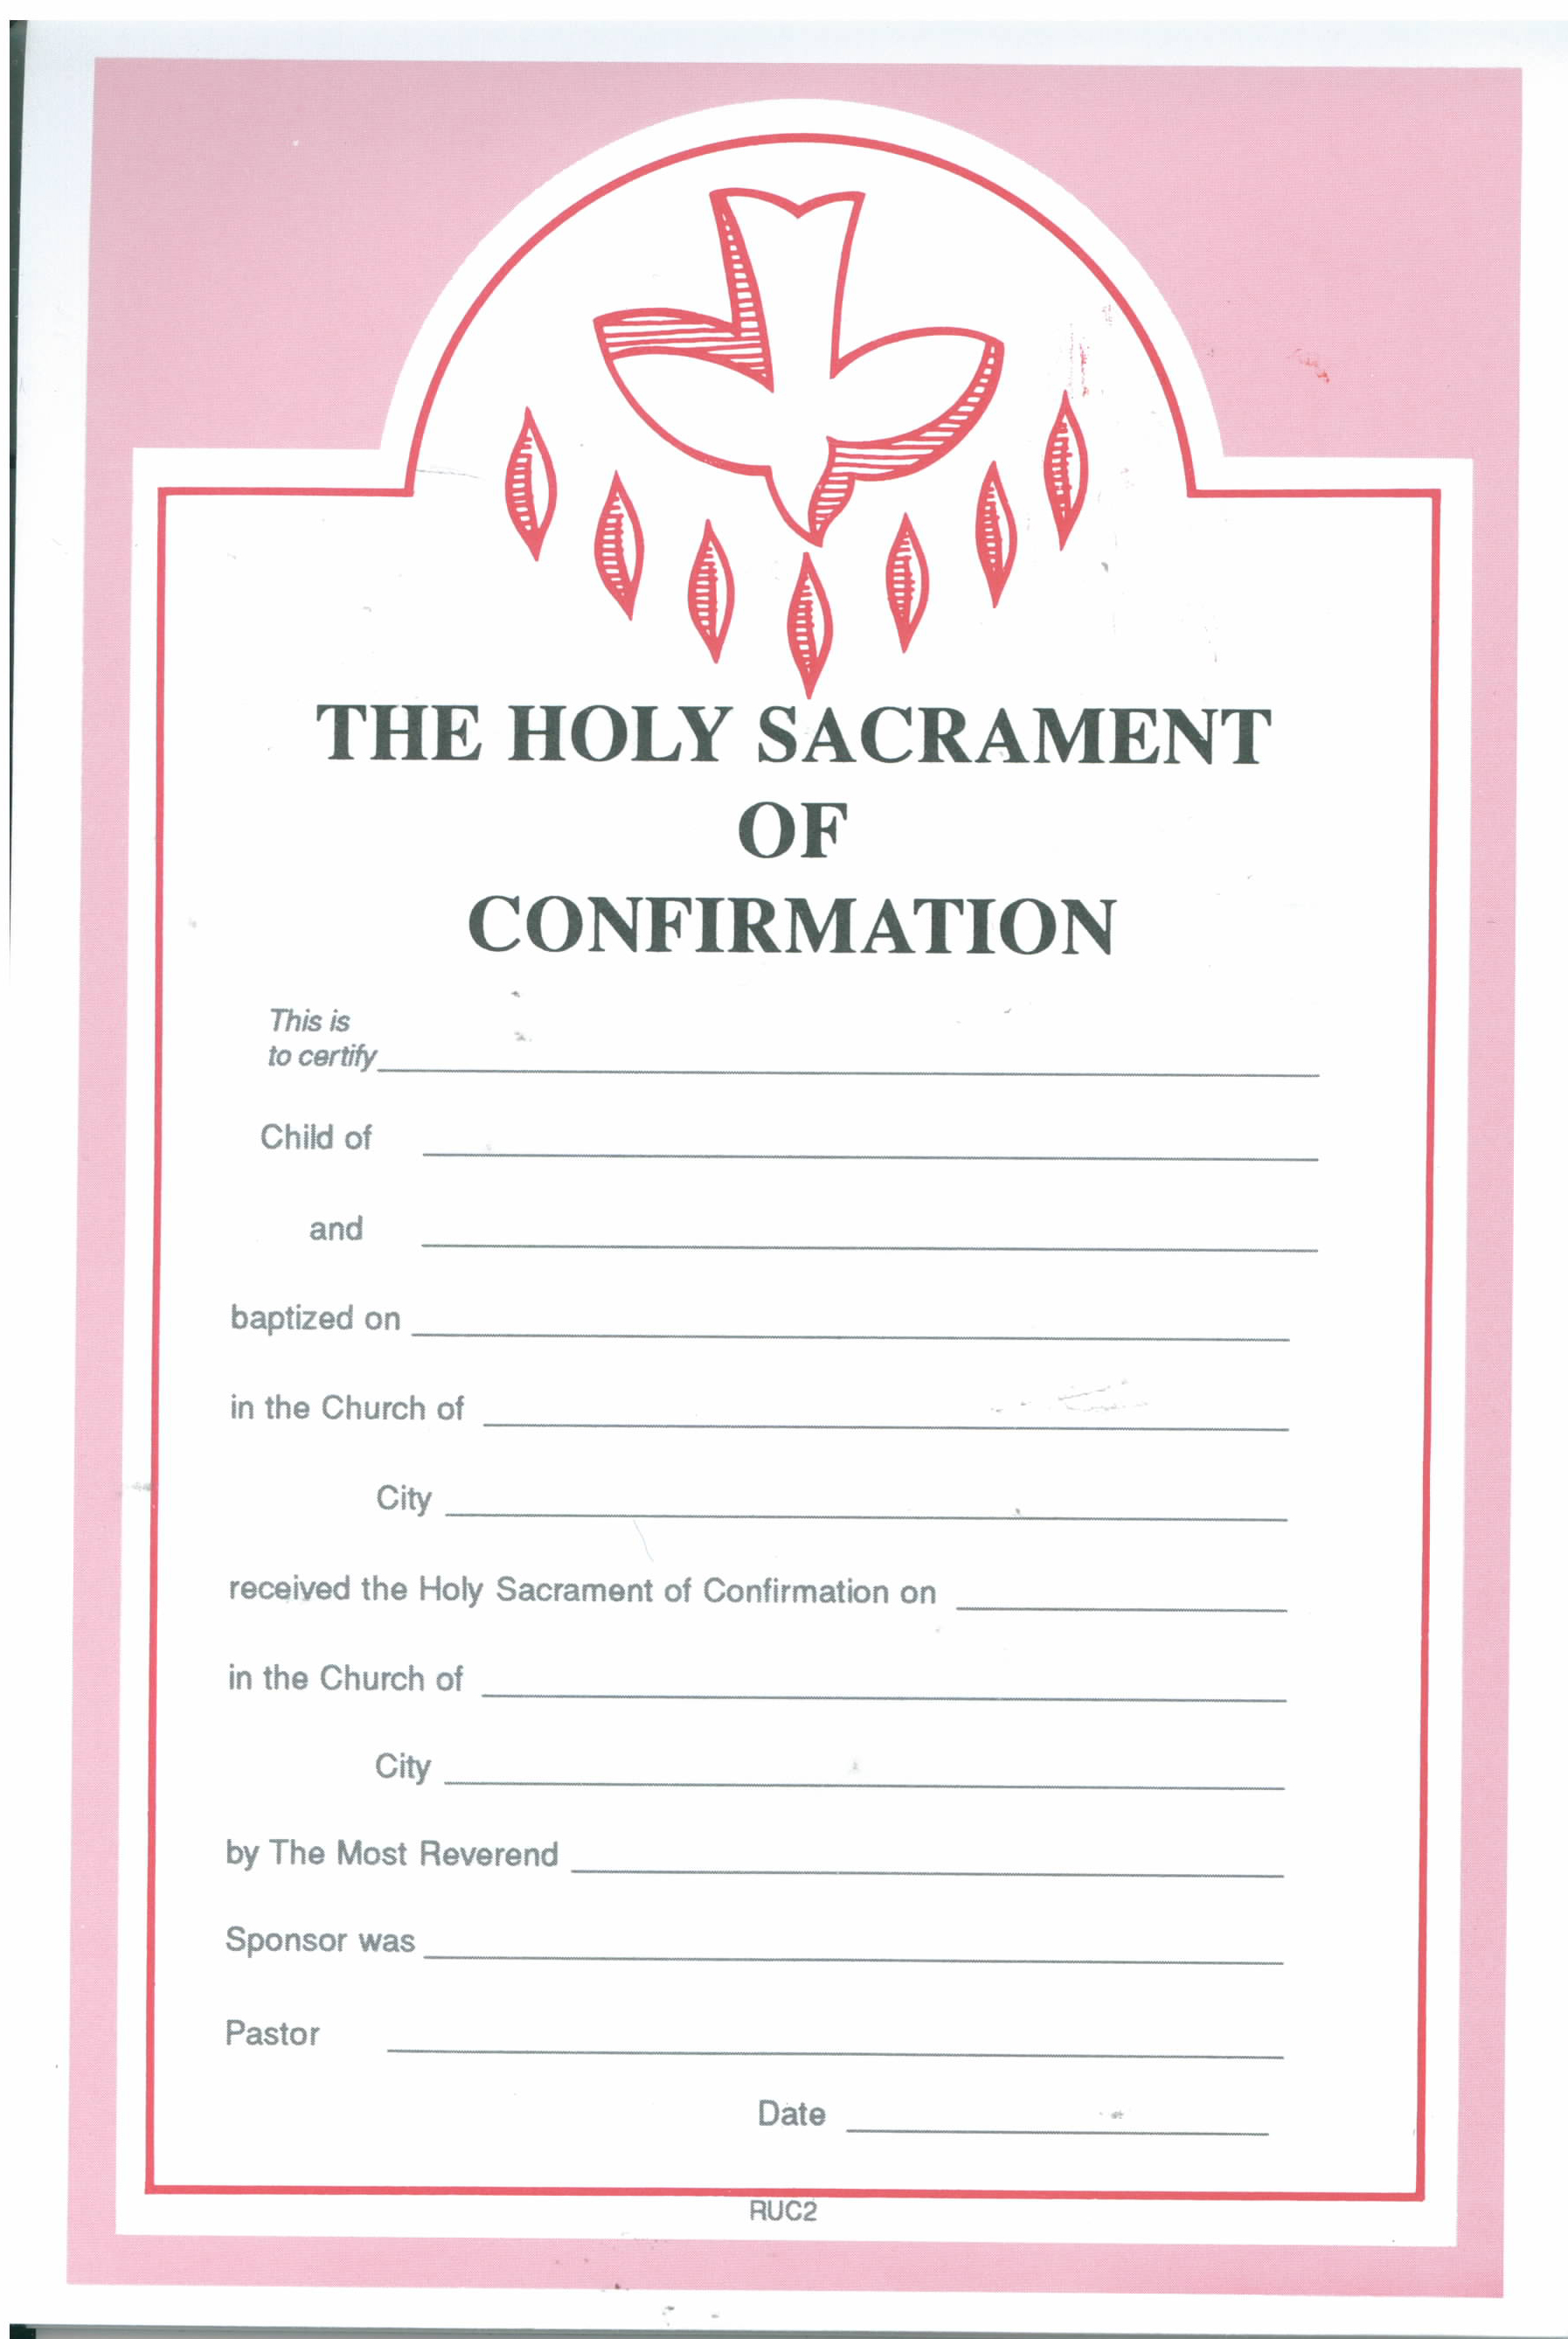 Holy Sacrament Of Confirmation Certificate 50 per pad-8-RUC2